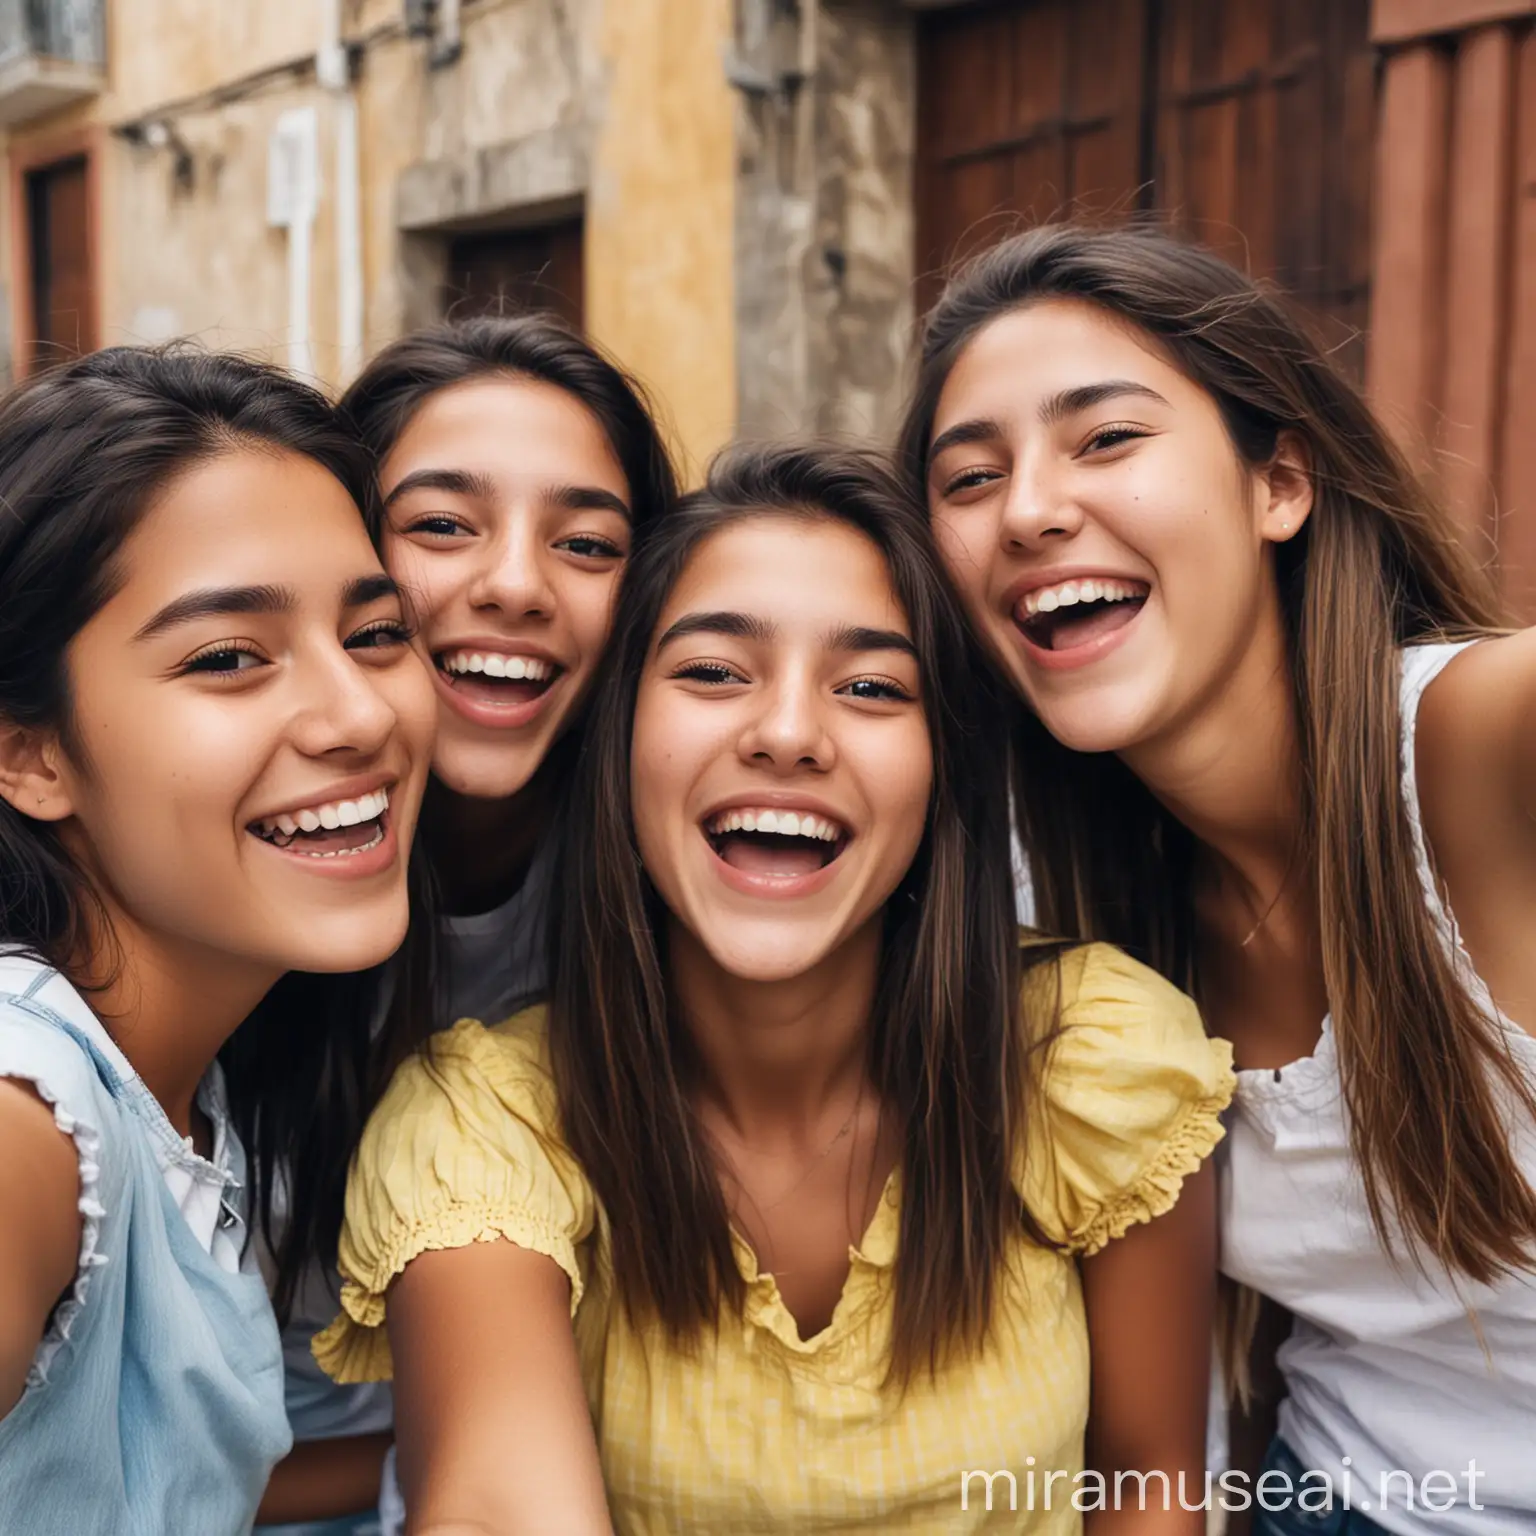 Colombian Teenager Girl Taking Selfie with Laughing Friends